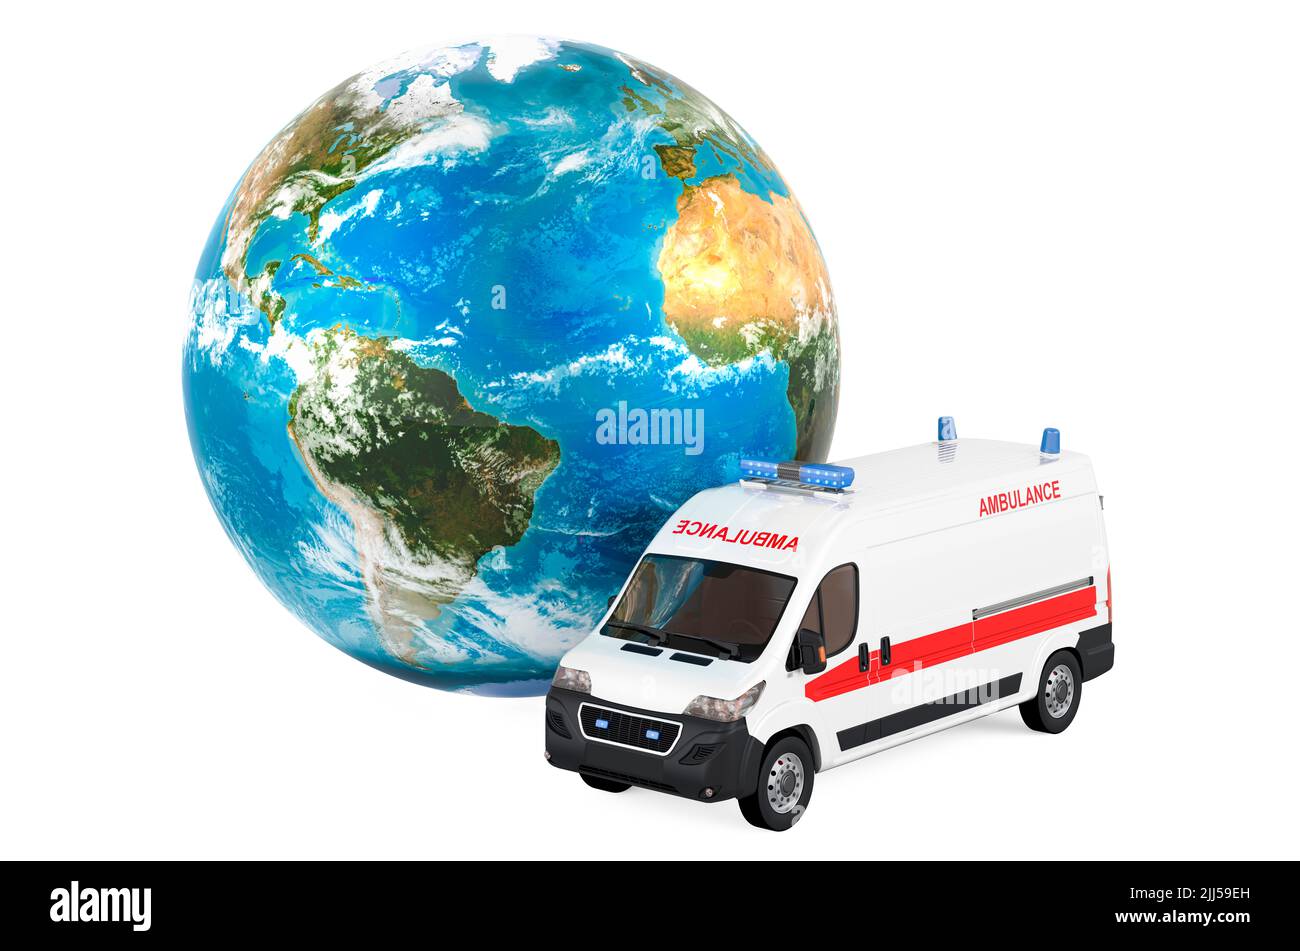 Ambulance van with Earth Globe, 3D rendering isolated on white background Stock Photo